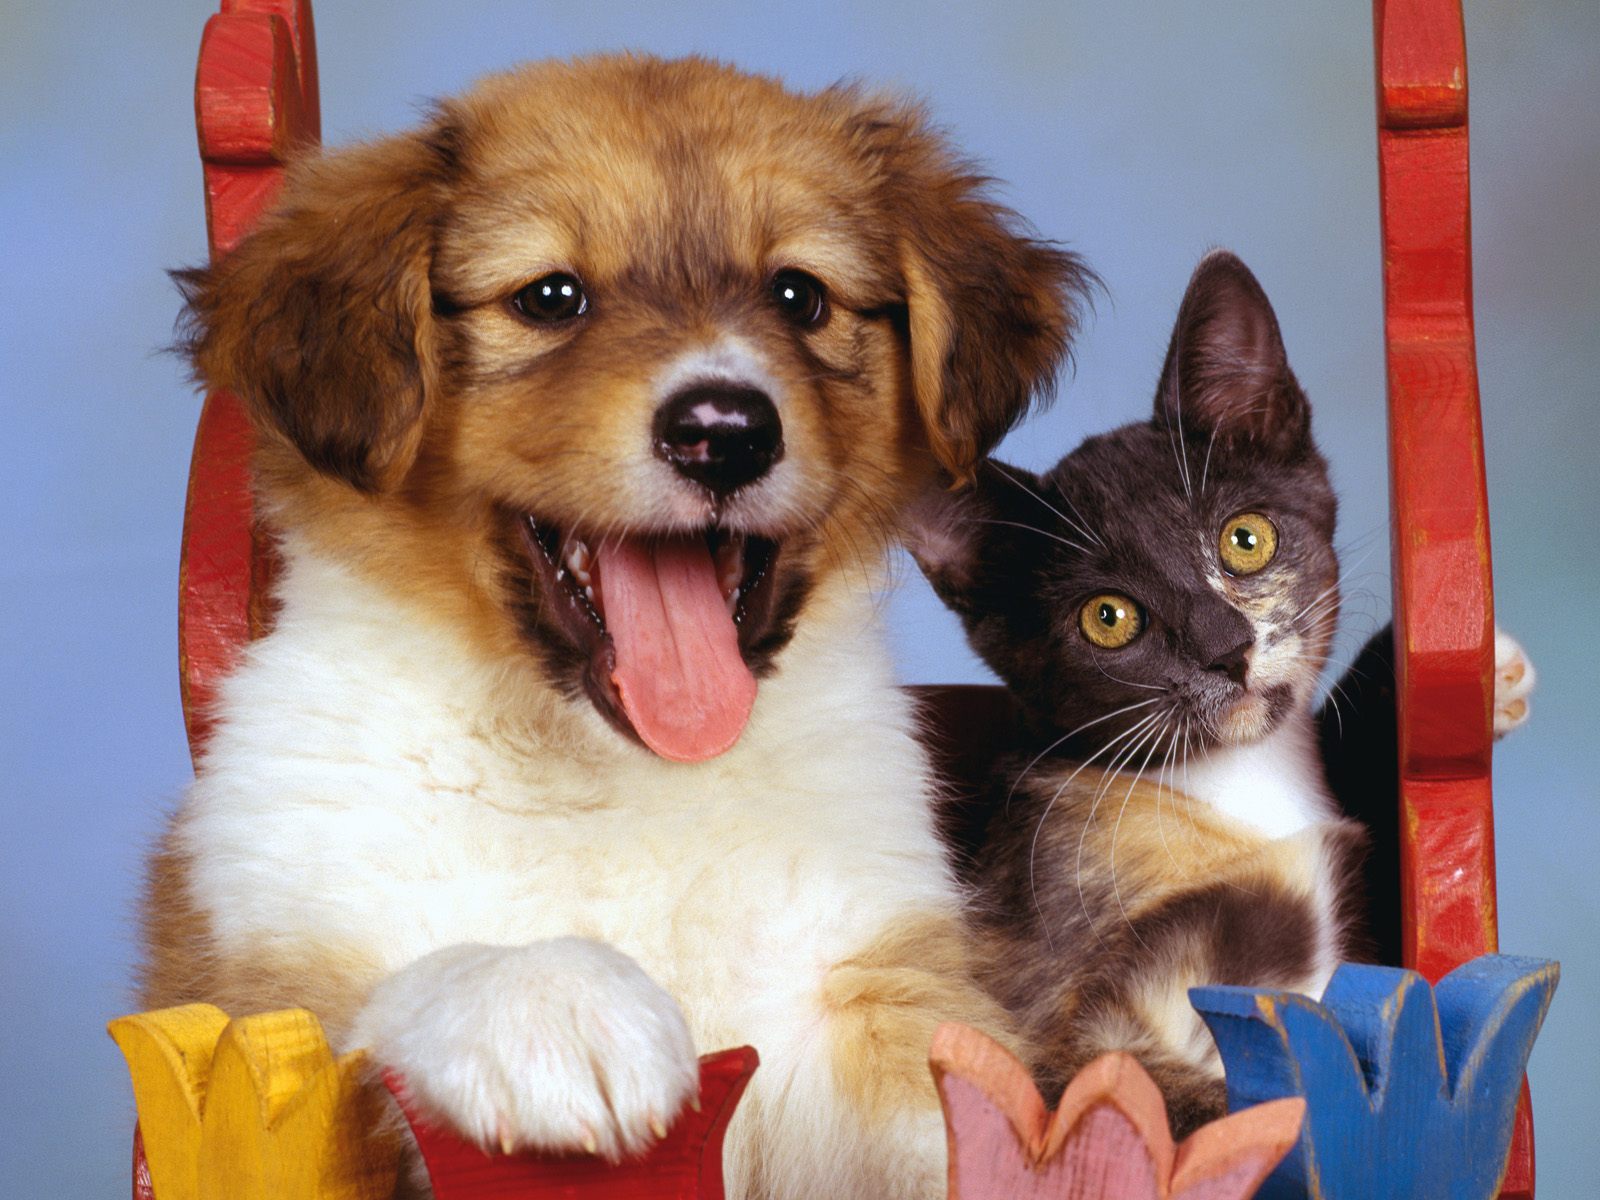 Cute Puppies And Kittens Wallpaper - Cat And Dog 3 , HD Wallpaper & Backgrounds